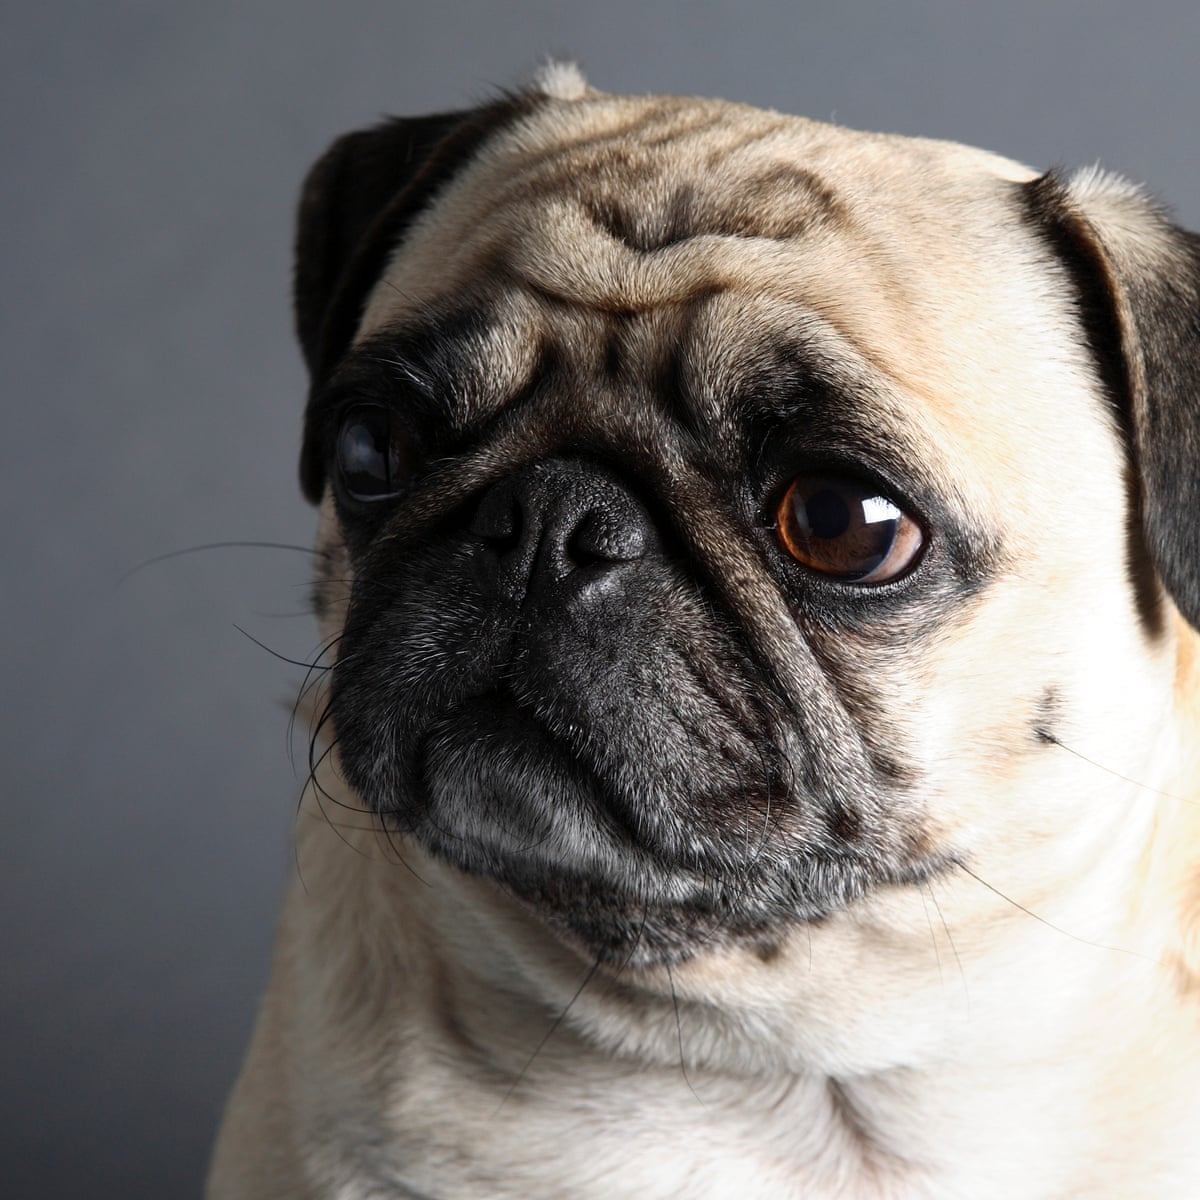 Vets ask prospective dog owners to avoid pugs and other flat-faced breeds |  Dogs | The Guardian